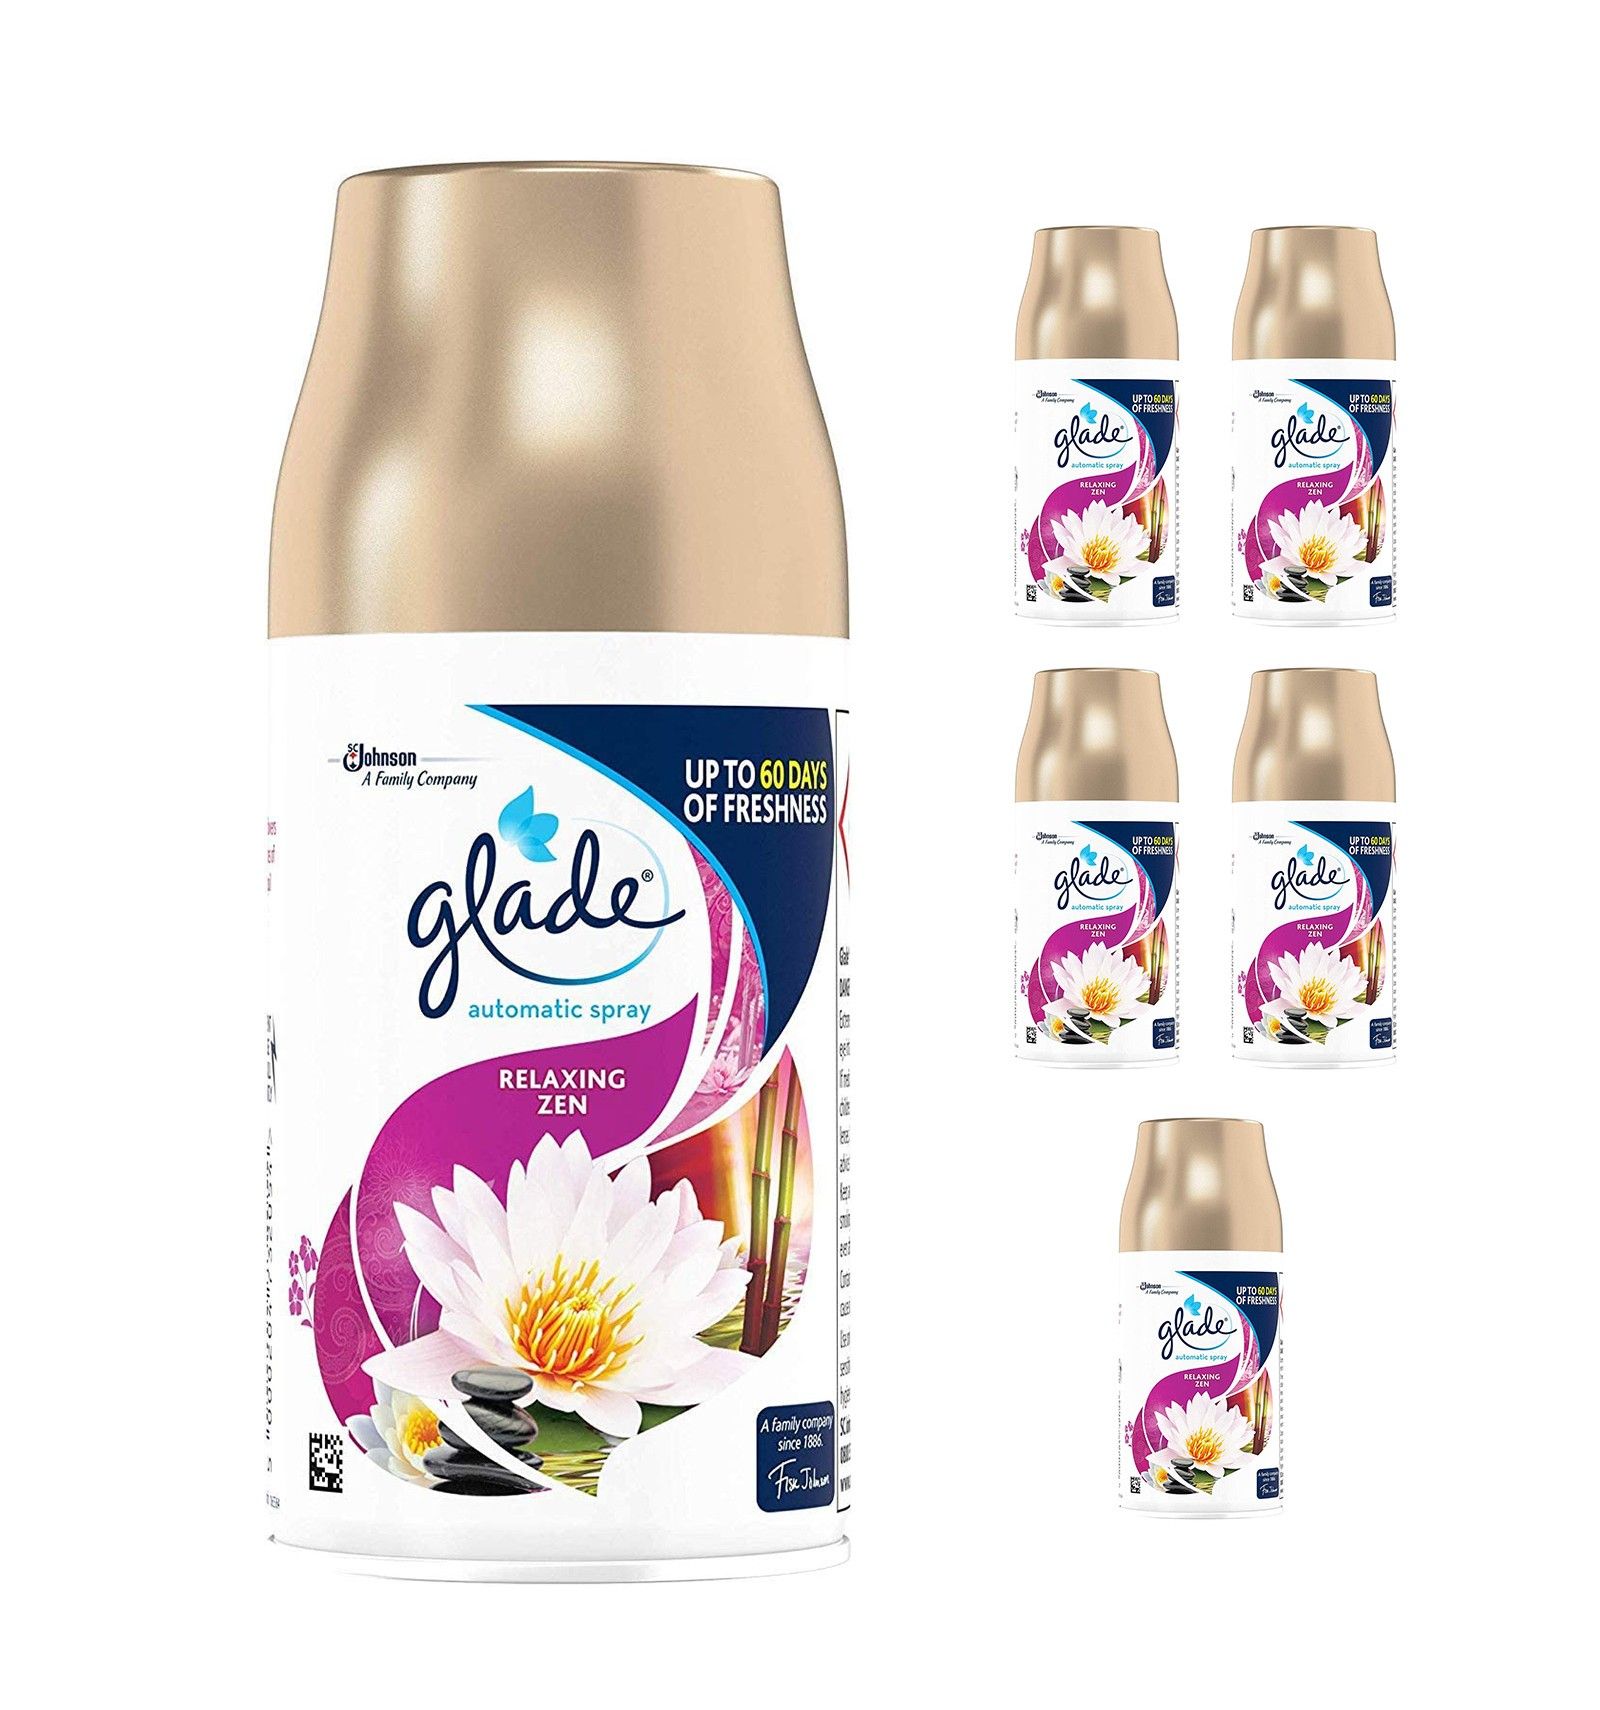 Glade Automatic Air Freshener Refill, Auto Spray Scent for Home, Relaxing Zen, 269ml